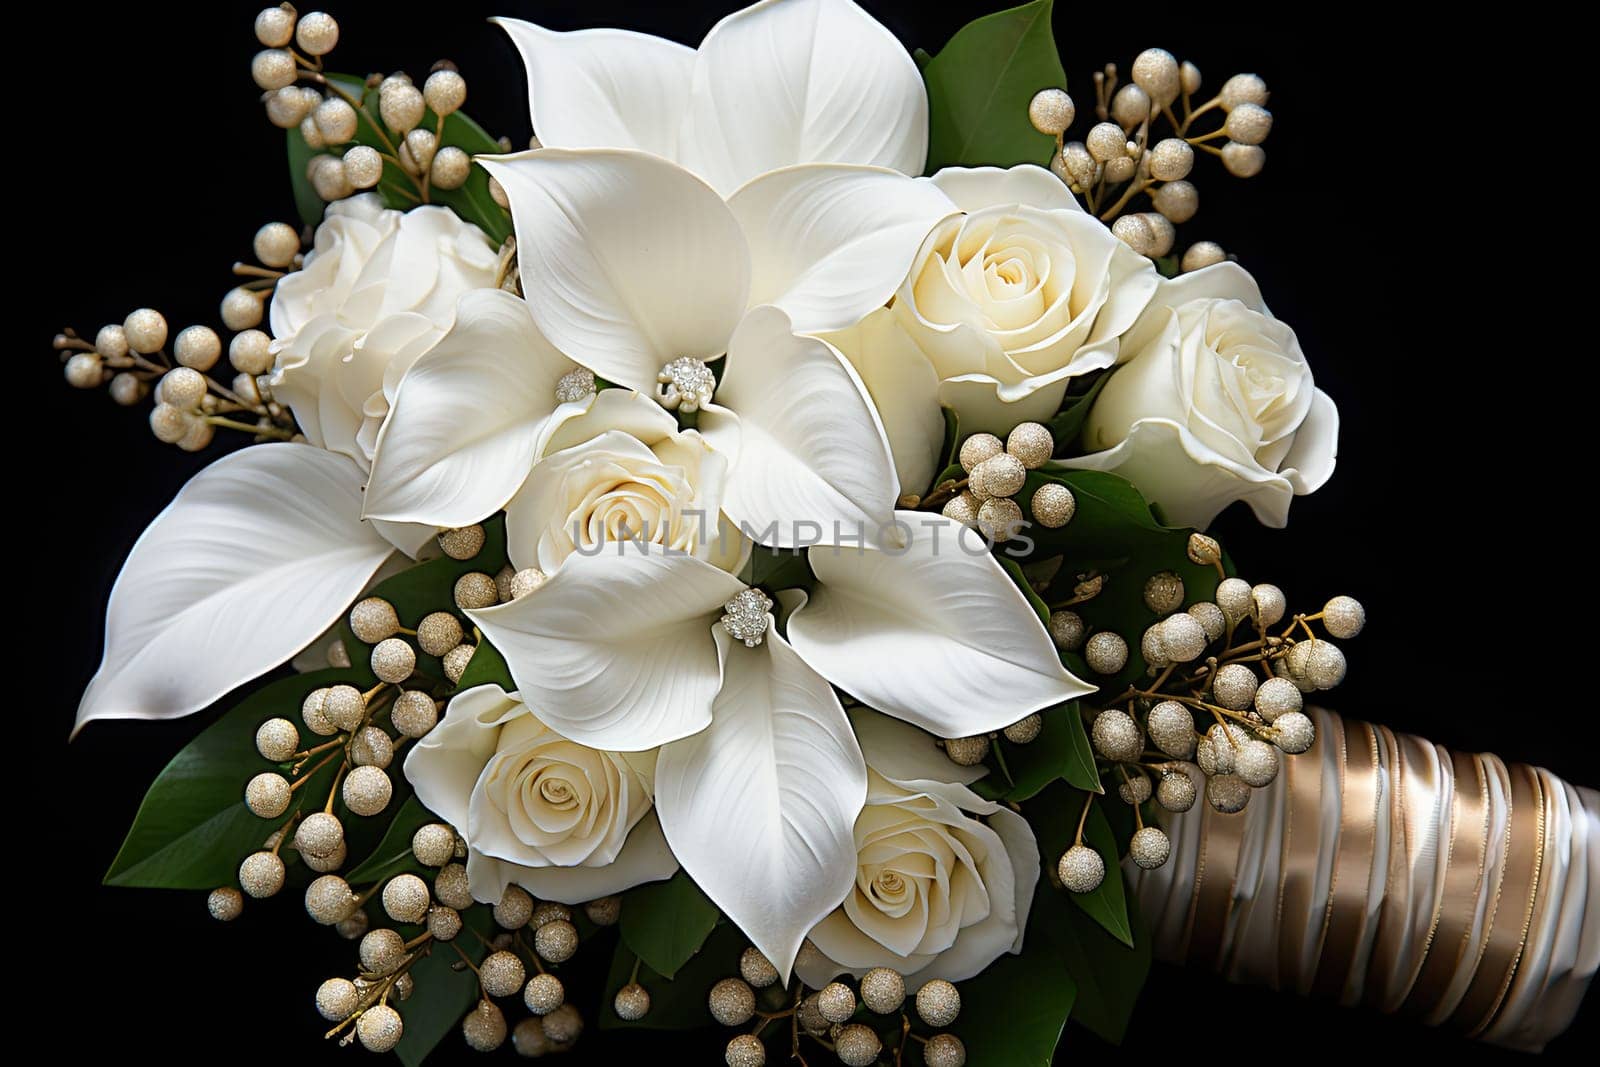 A Stunning Bridal Bouquet of White Flowers and Lush Greenery